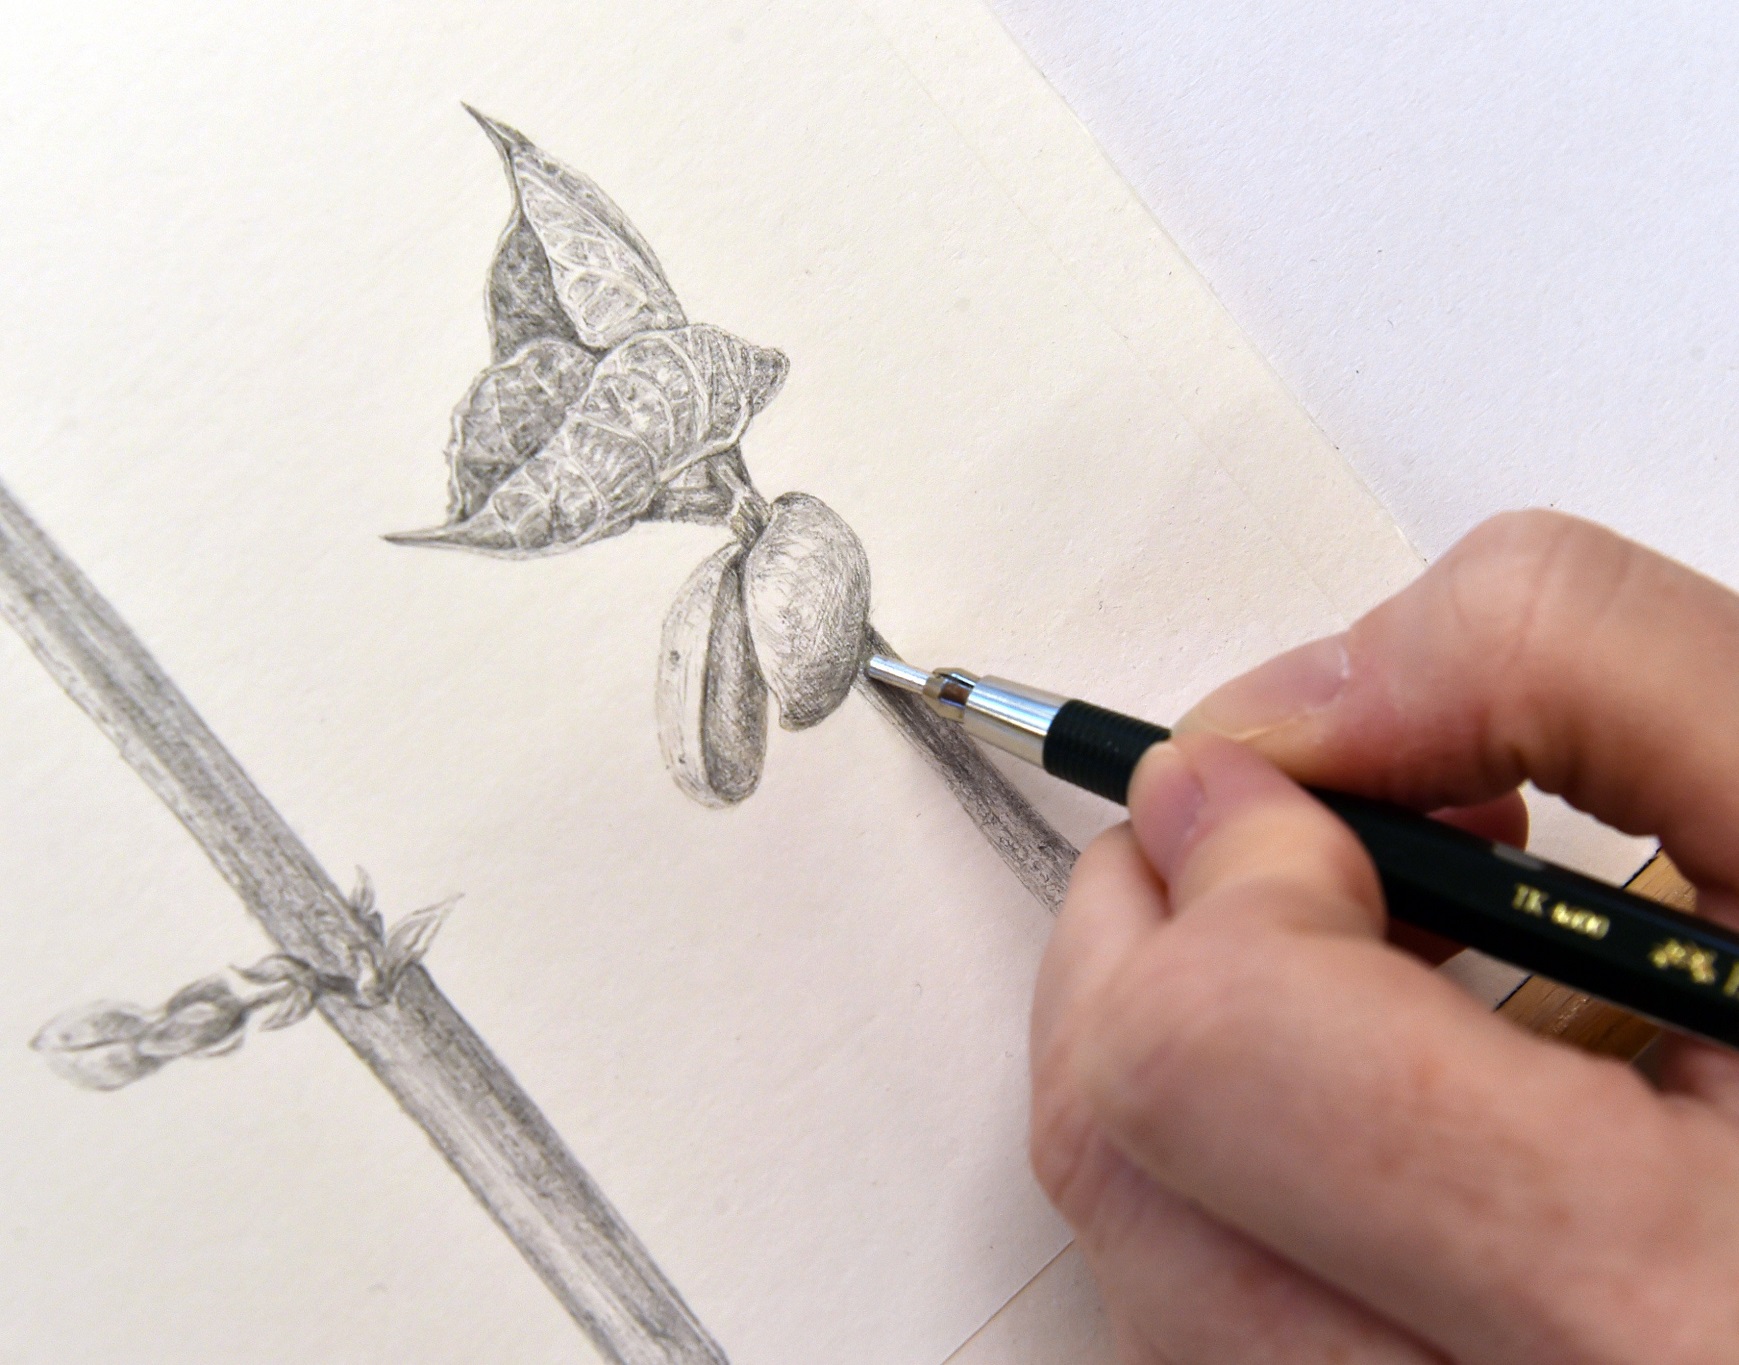 Silverpoint uses a thin piece of silver in a stylus. 